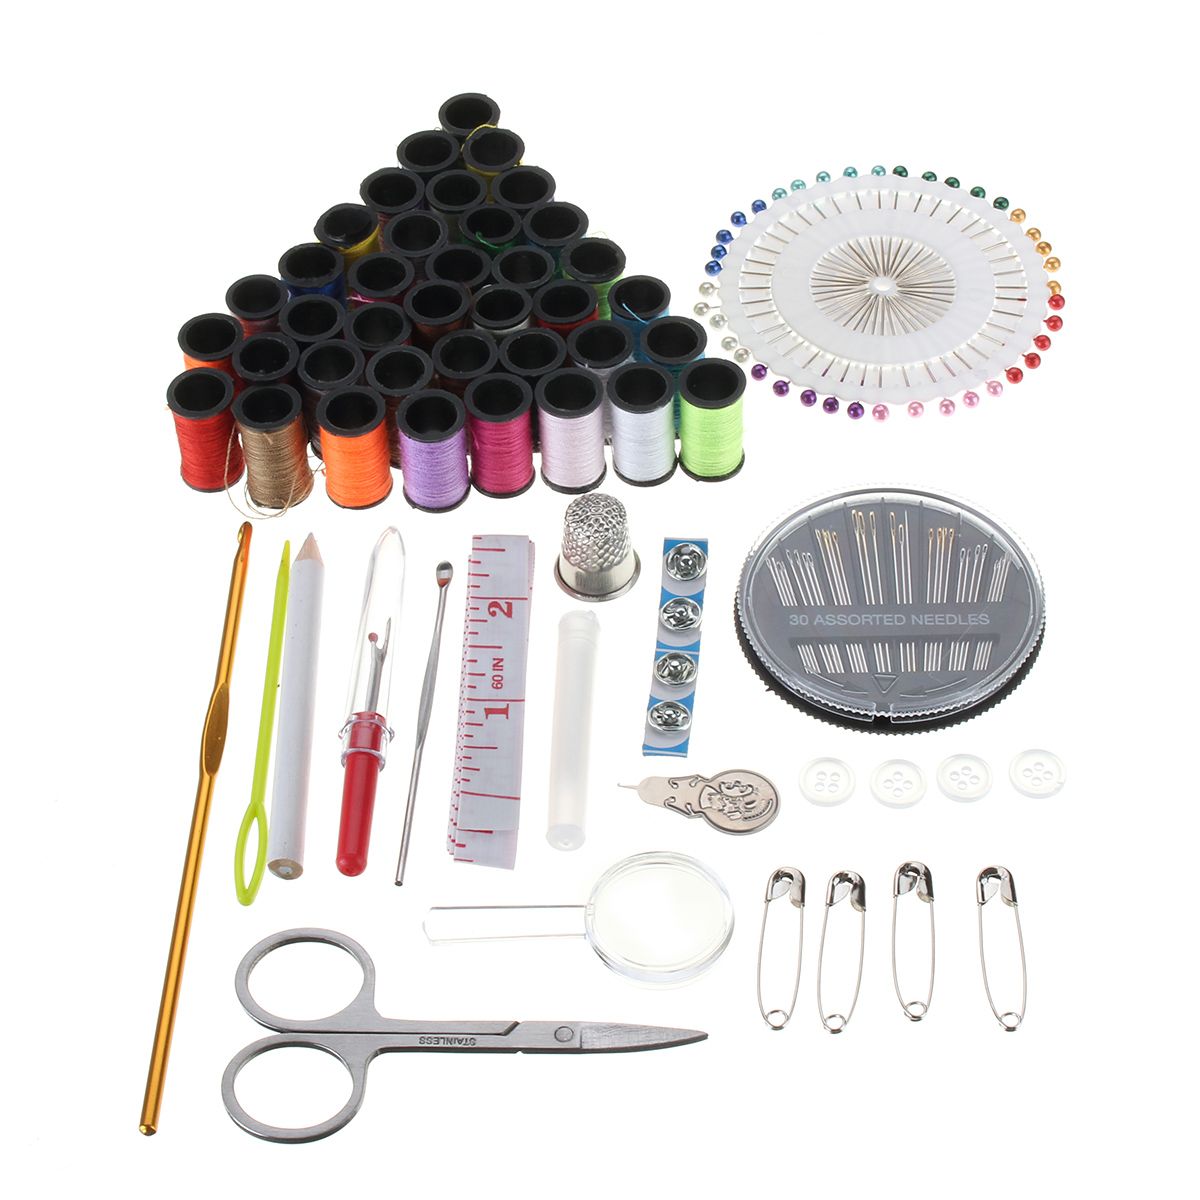 134Pcs-Leather-Craft-Tool-Kit-Needle-Sewing-Tape-Thread-Stitching-Travel-Home-1241541